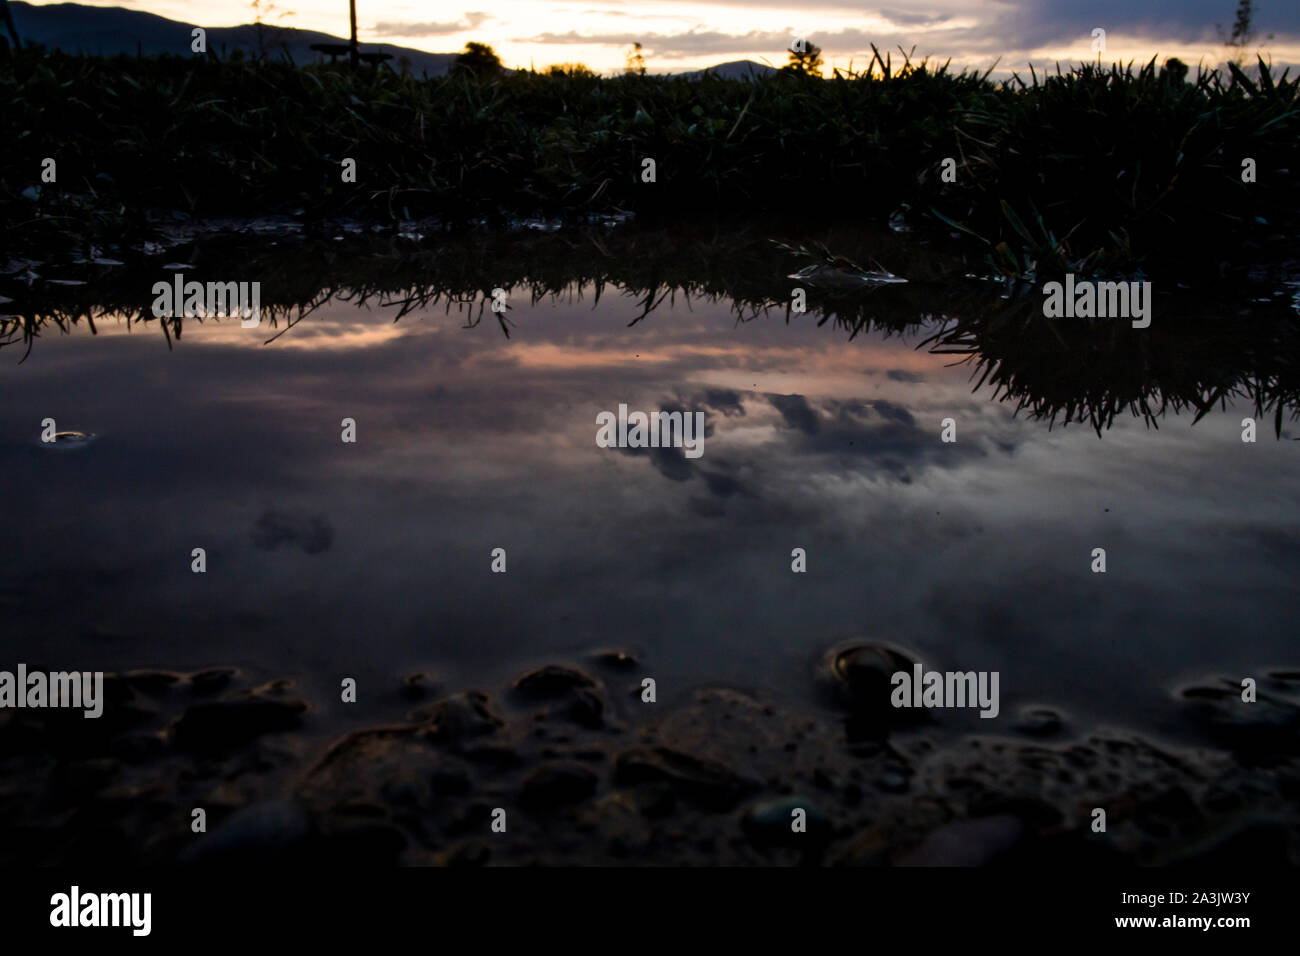 A reflection of clouds in a puddle at sunset Stock Photo